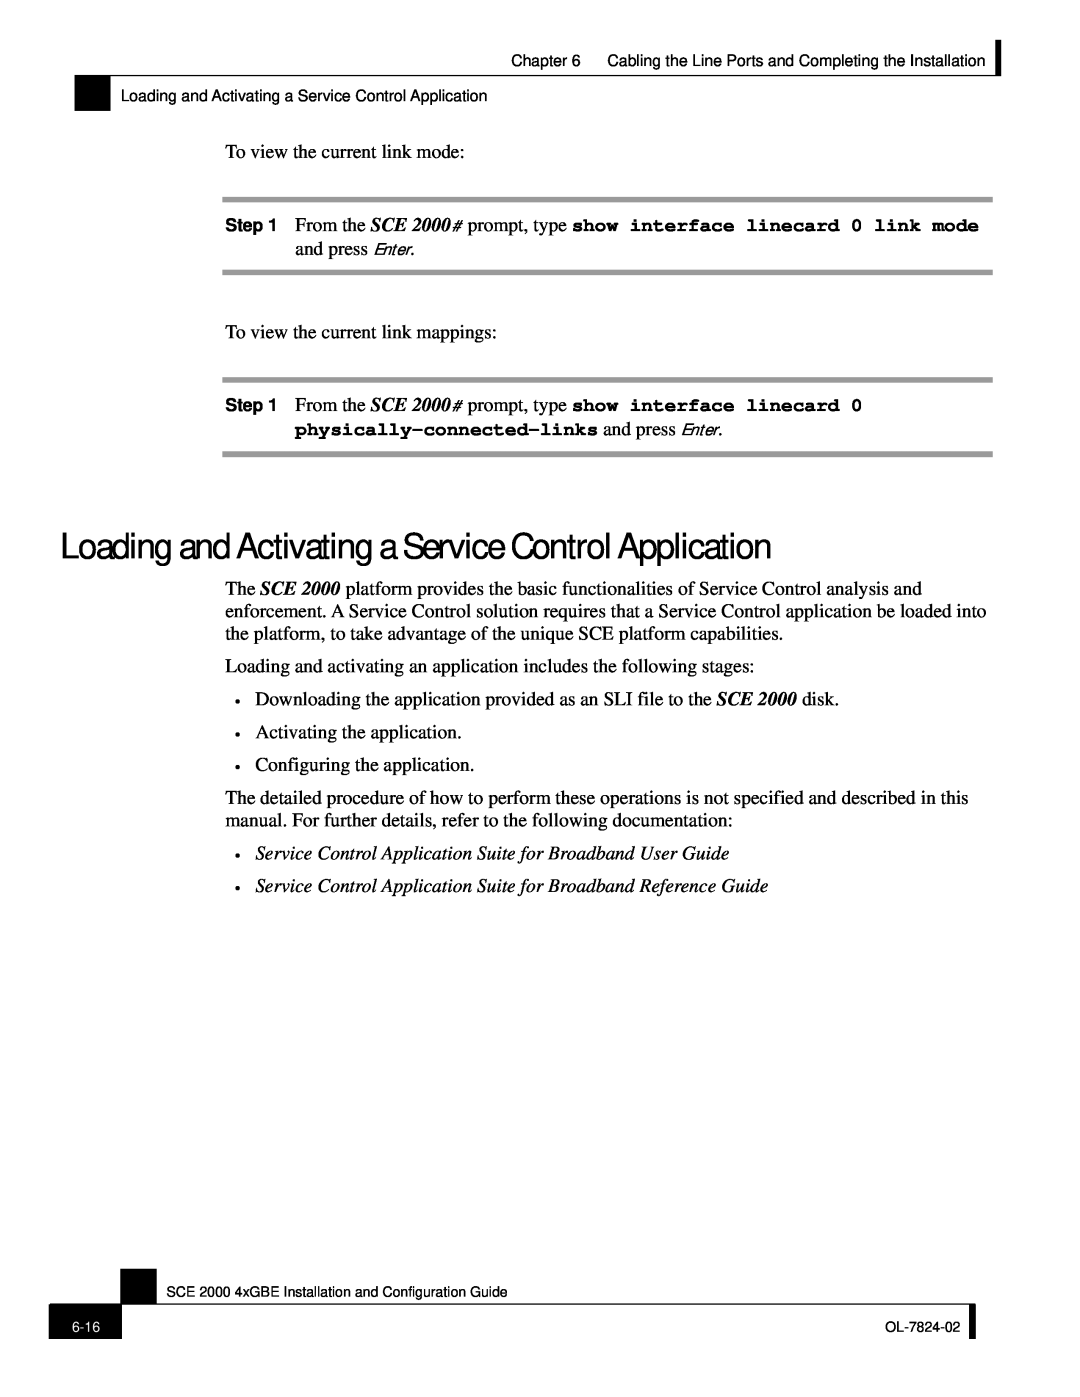 Cisco Systems SCE 2000 4xGBE manual Loading and Activating a Service Control Application 